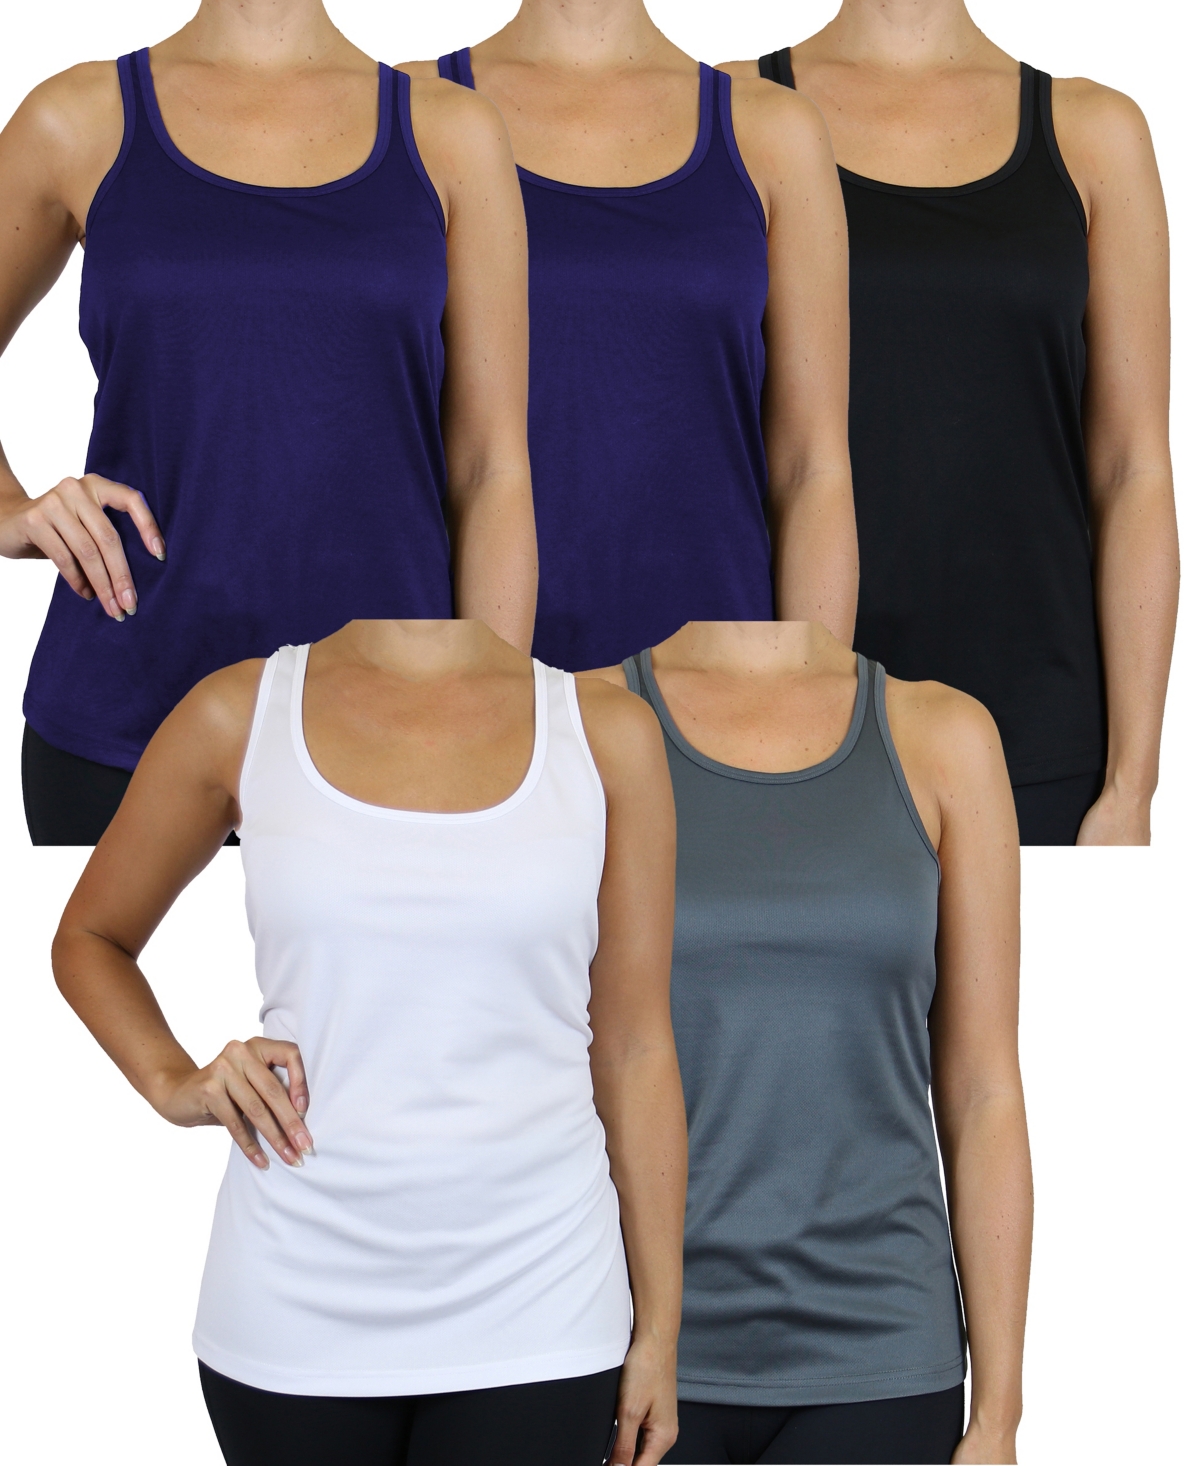 Galaxy By Harvic Women's Moisture Wicking Racerback Tanks-5 Pack In Navy Multi Color